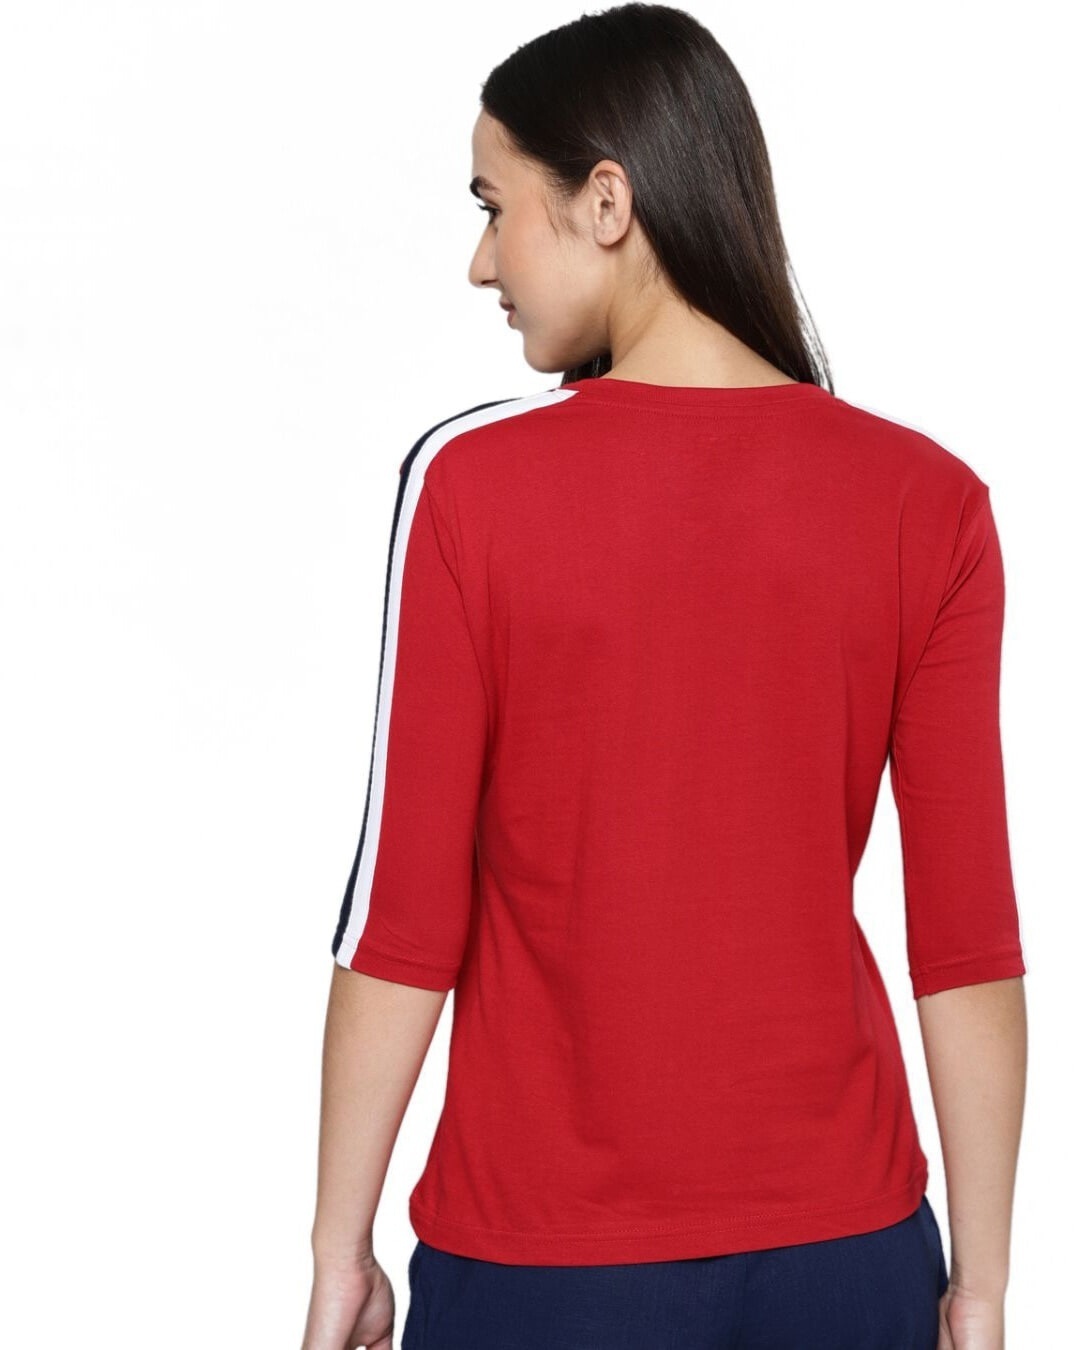 Shop Women's Red Solid T-shirt